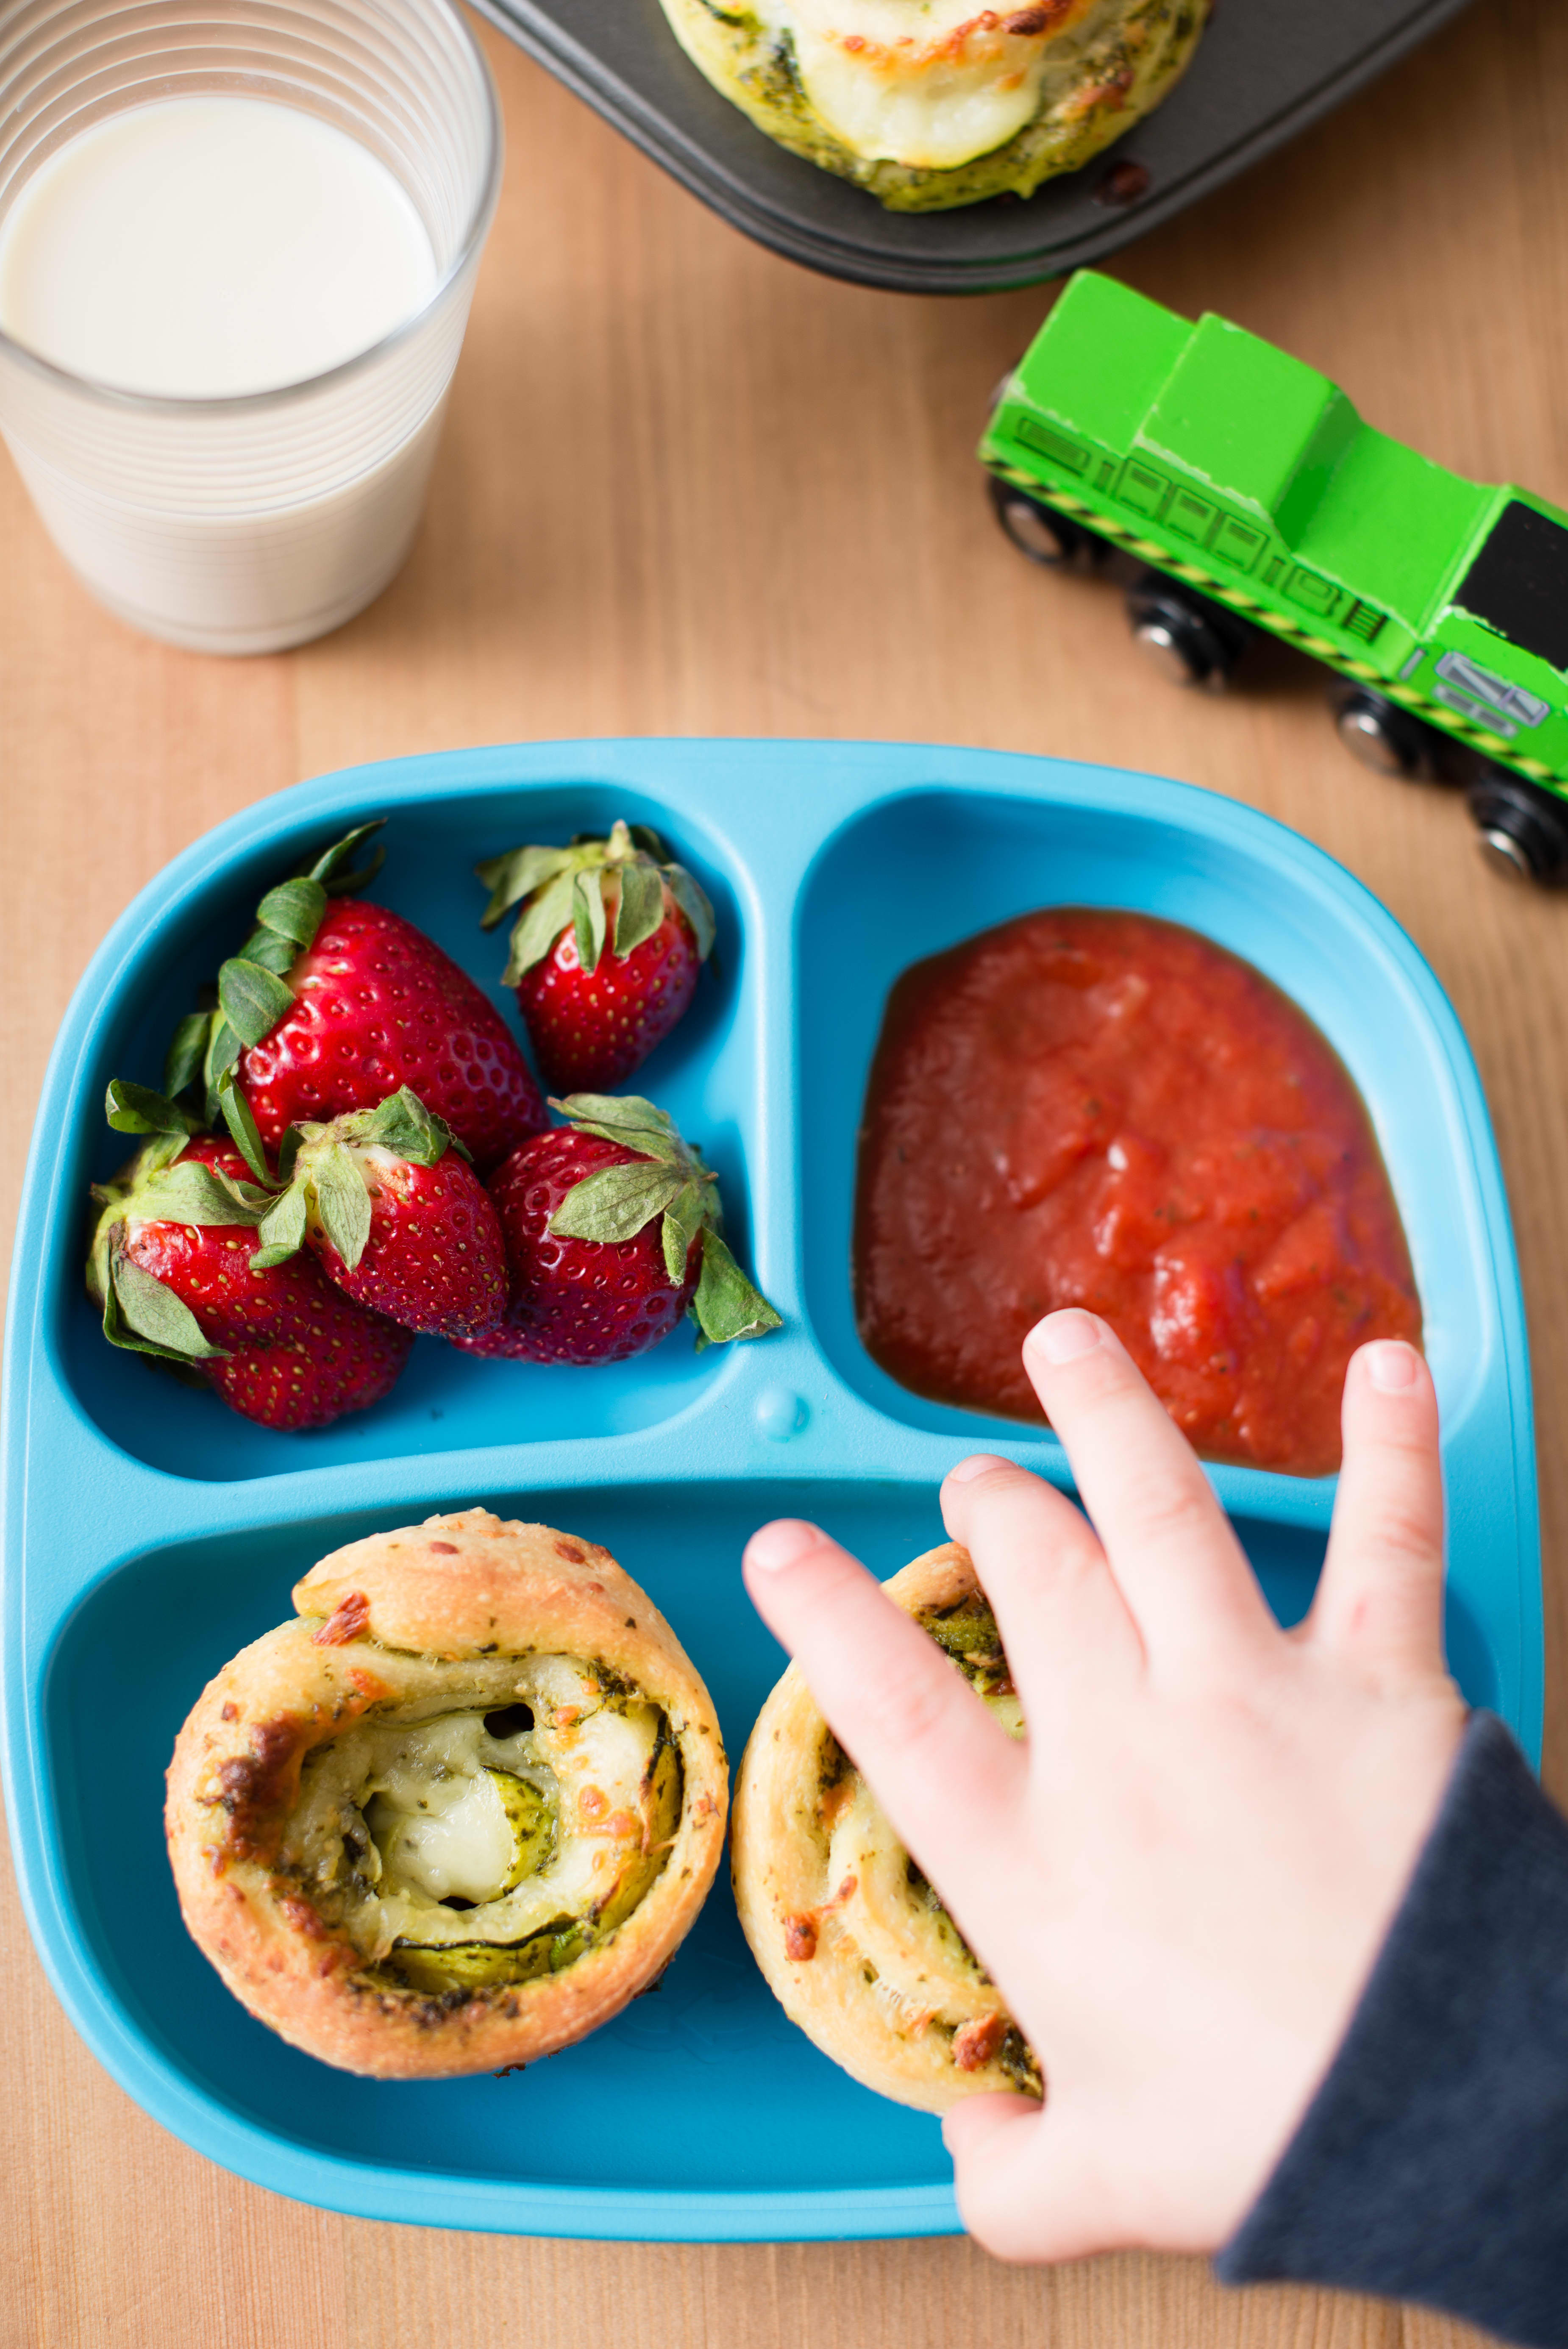 Healthy Dinner Ideas Toddlers : 20 Healthy Daycare Meal Ideas for ...